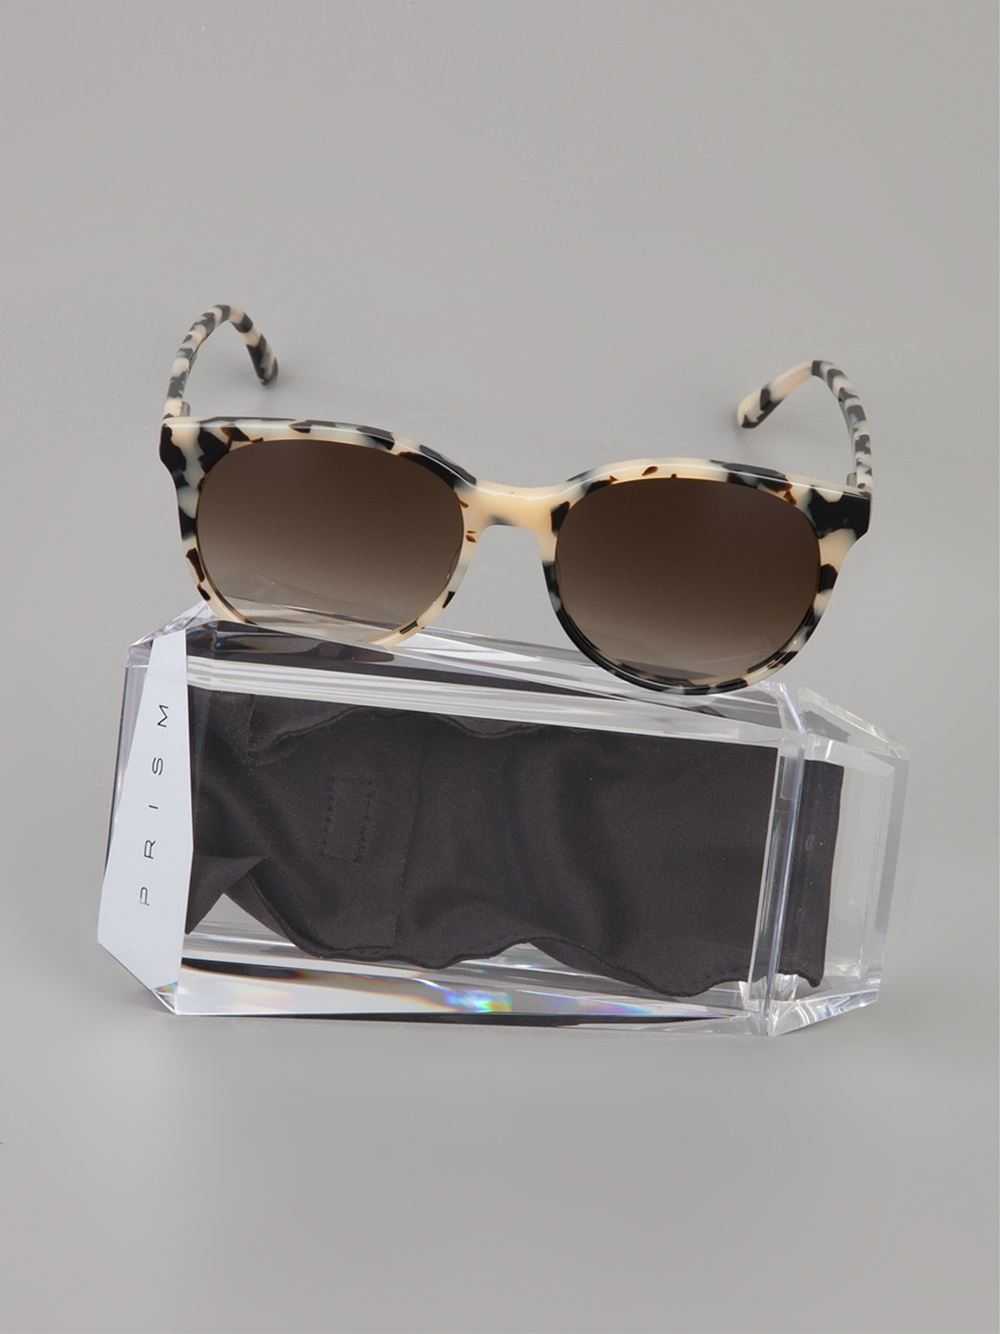 Sunglasses Dmy By Dmy - Branded sunglasses - DMY02TA